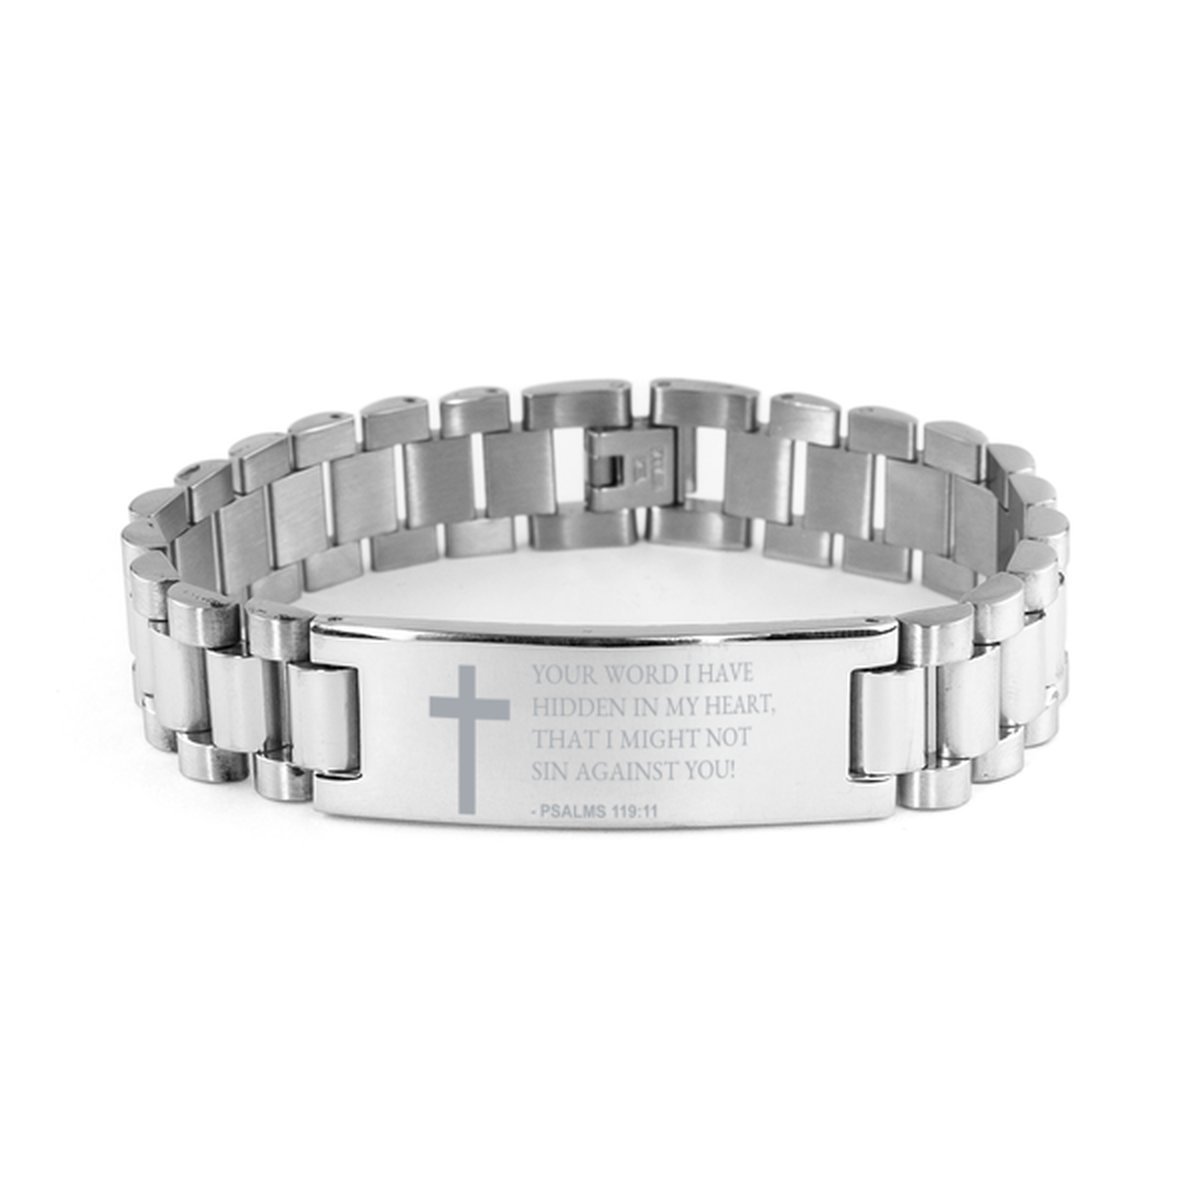 Christian Ladder Stainless Steel Bracelet, Psalms 119:11 Your Word I Have Hidden In My Heart, That I Might, Motivational Bible Verse Gifts For Men Women